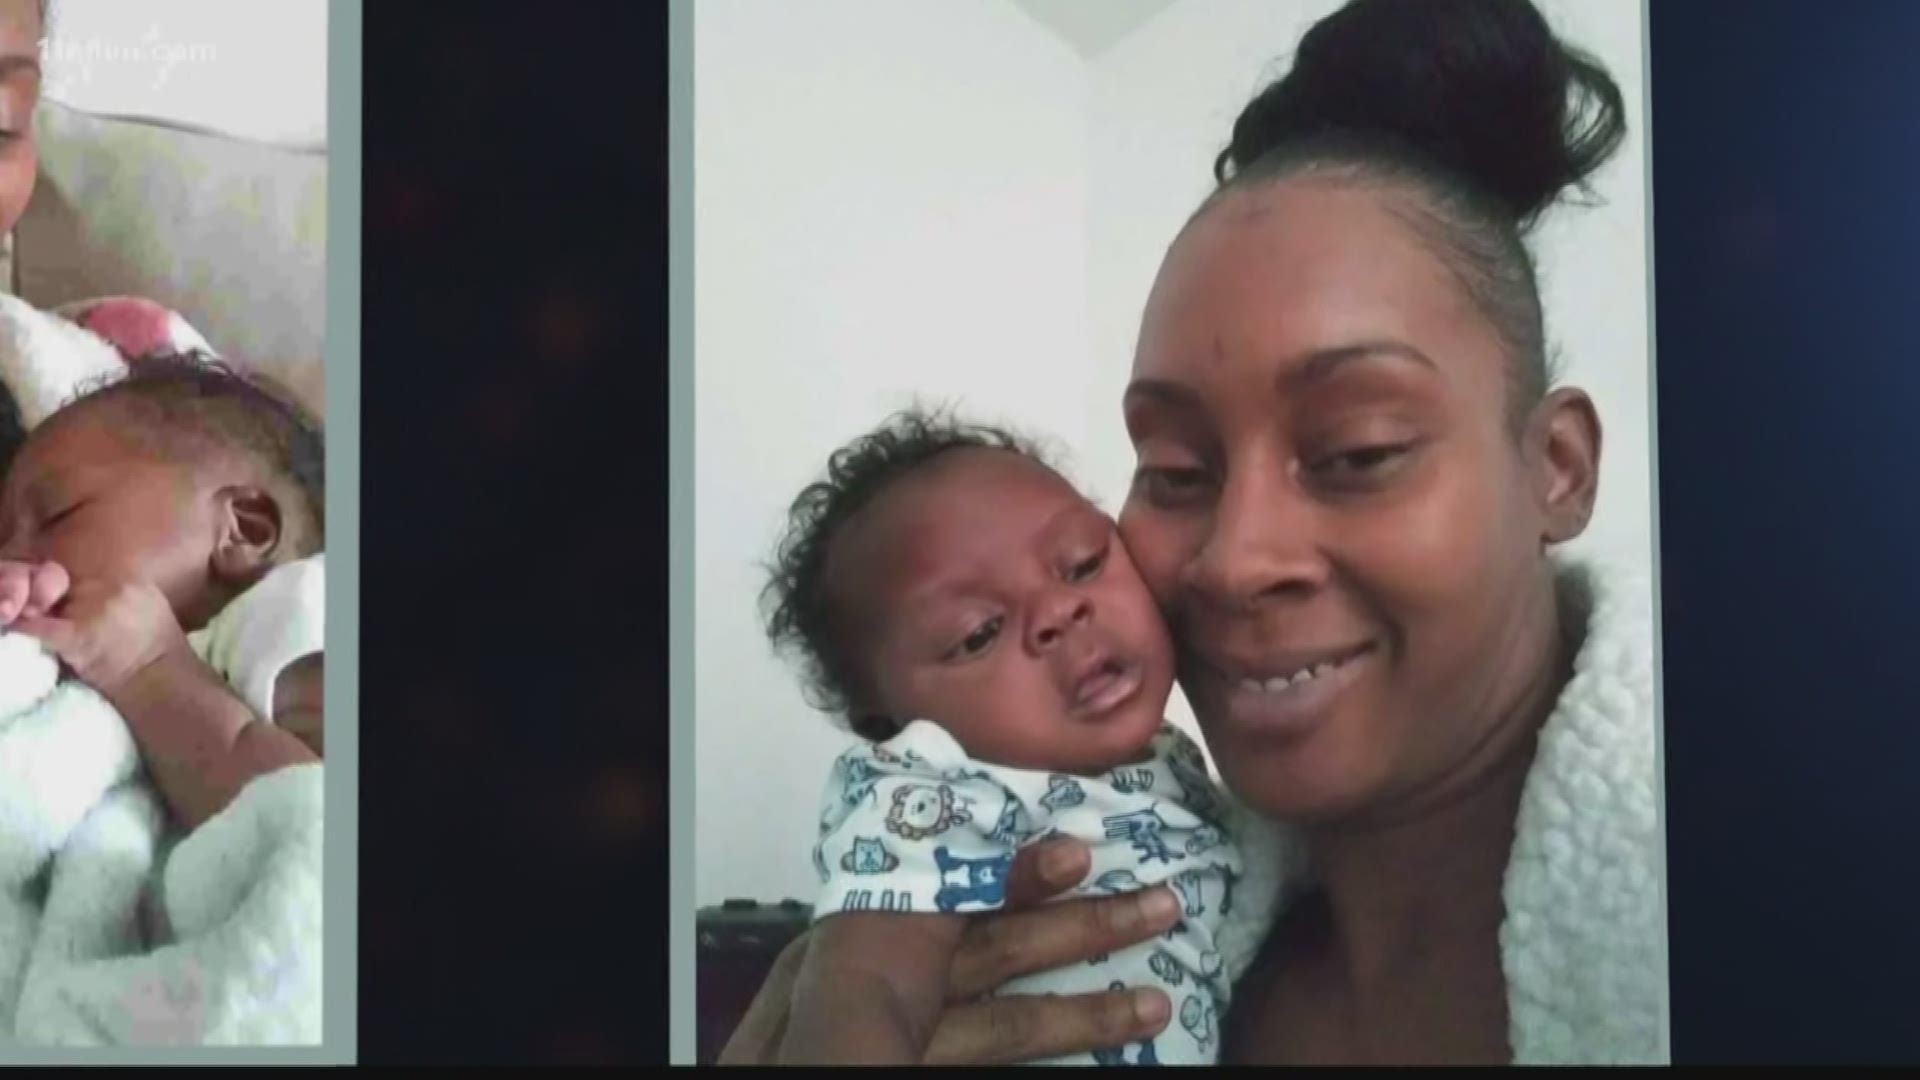 After missing a court appearance while grieving the death of her two-month-old, Janae went back to court and was told she had to prove her child's death on the spot.